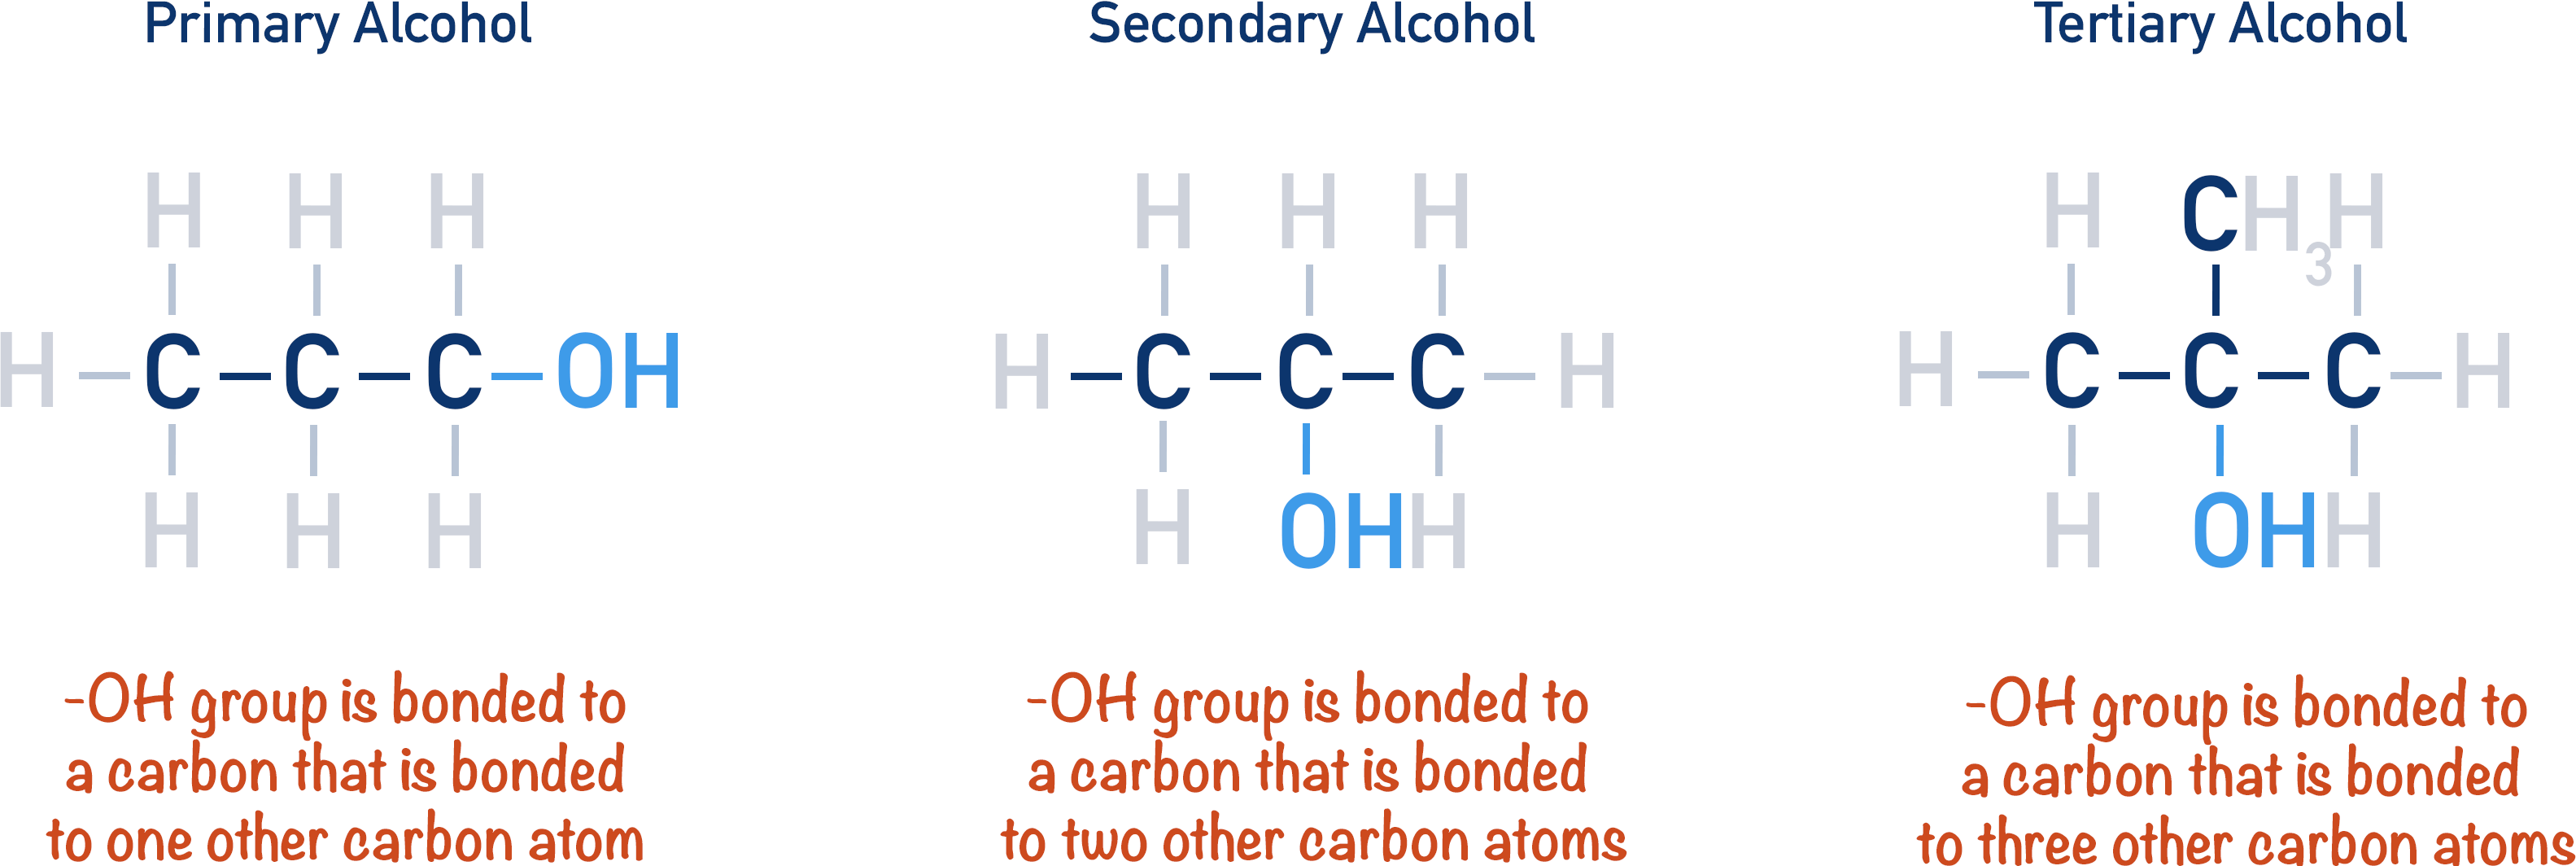 primary secondary and tertiary alcohols propanol